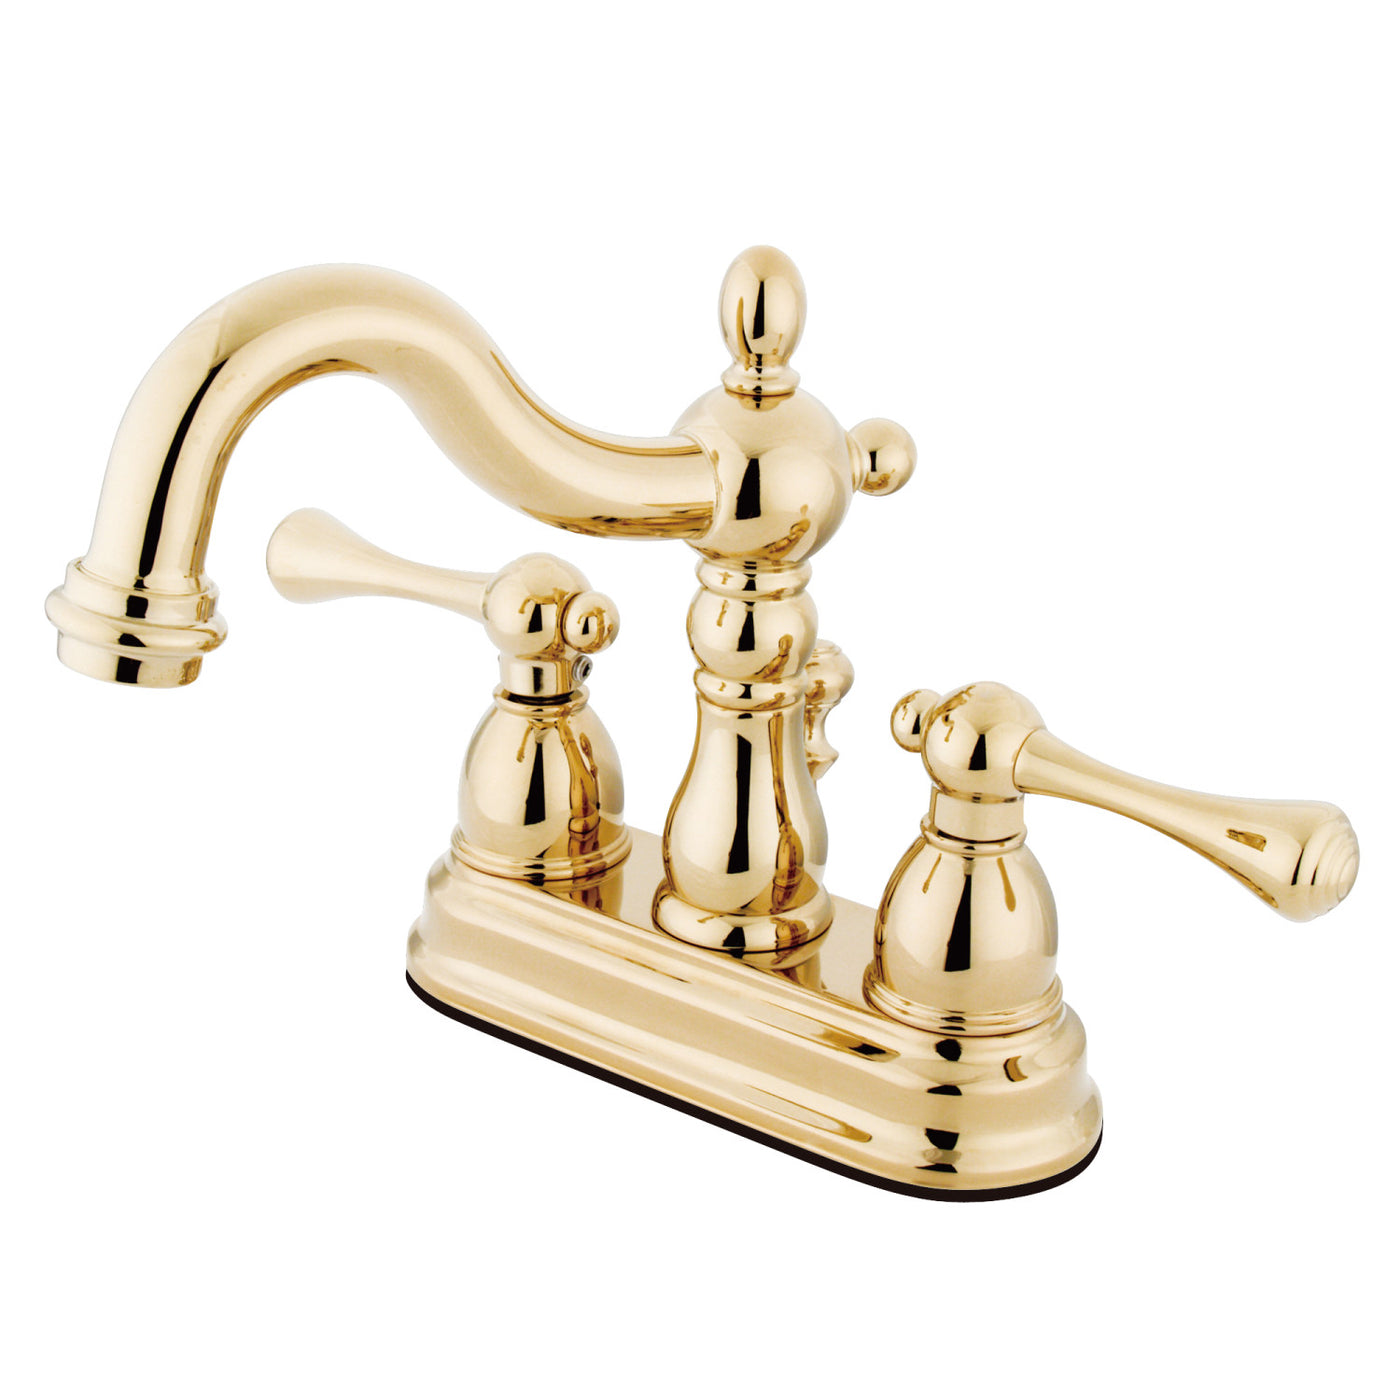 Elements of Design EB1602BL 4-Inch Centerset Bathroom Faucet with Retail Pop-Up, Polished Brass